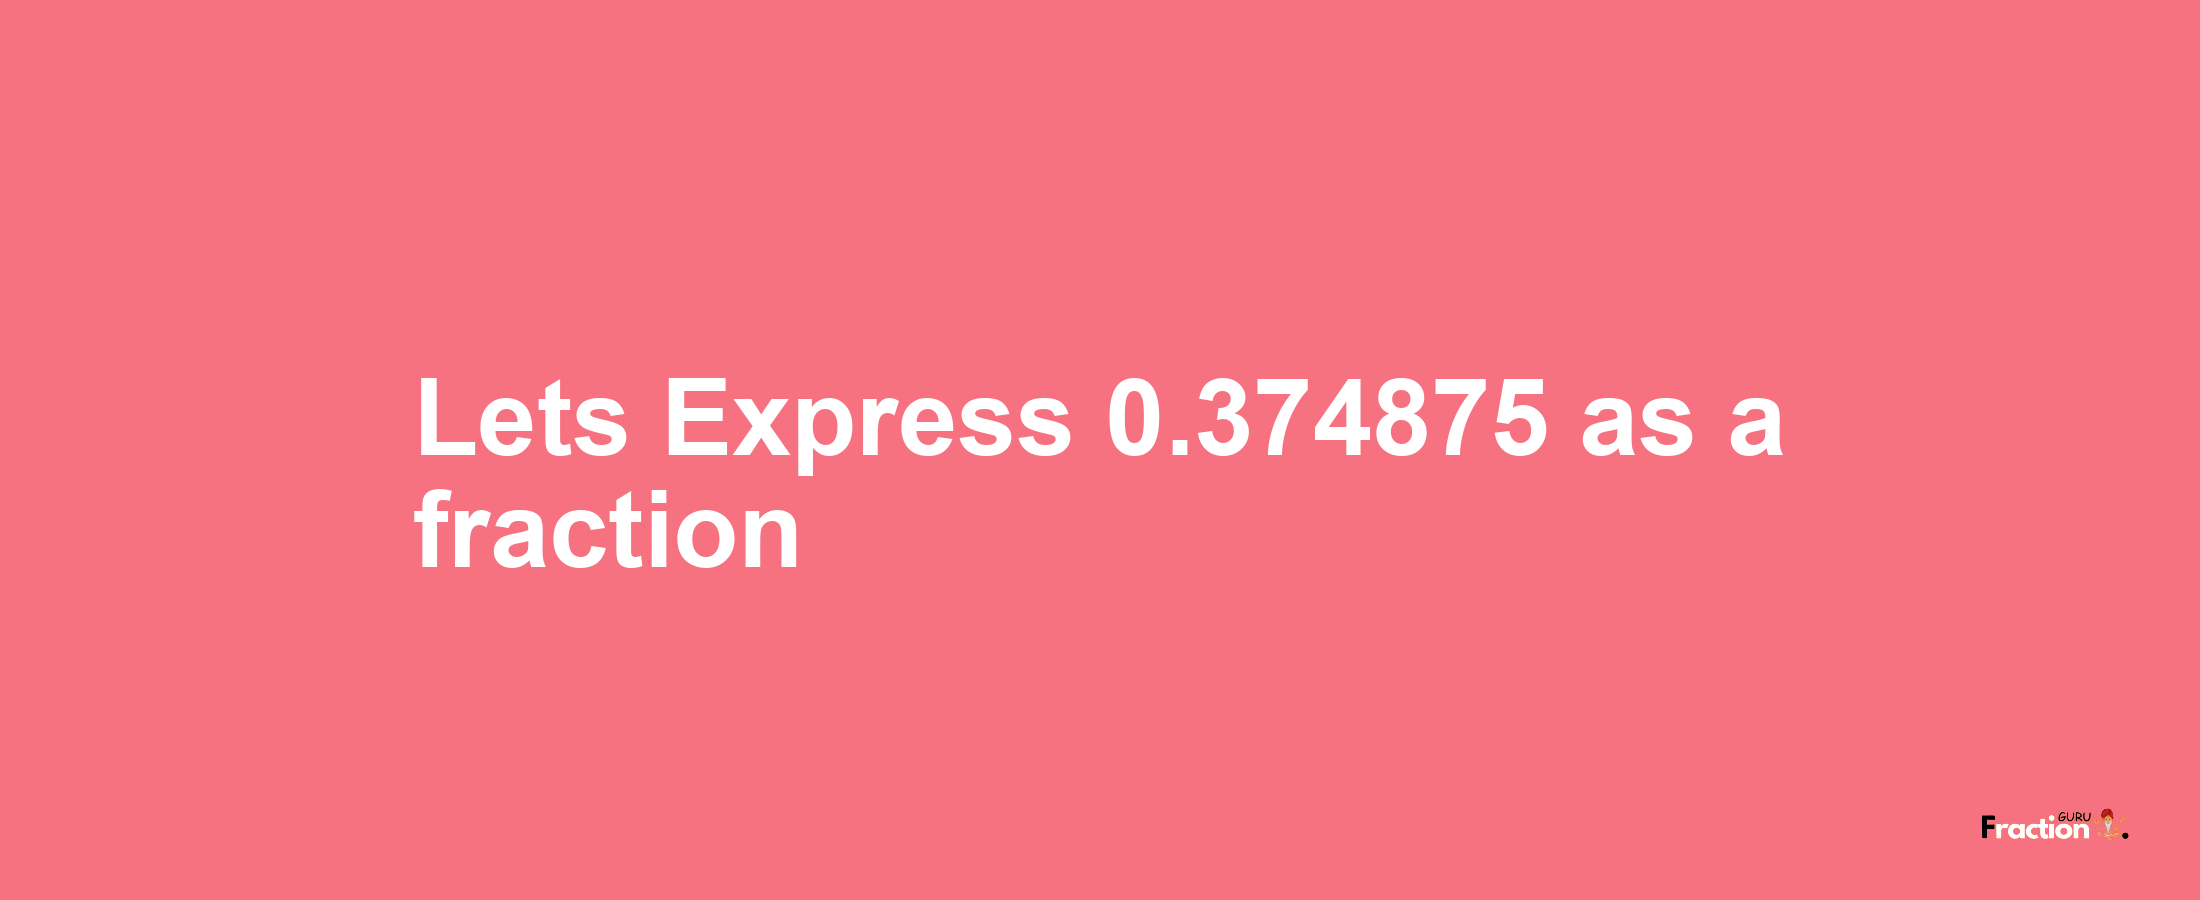 Lets Express 0.374875 as afraction